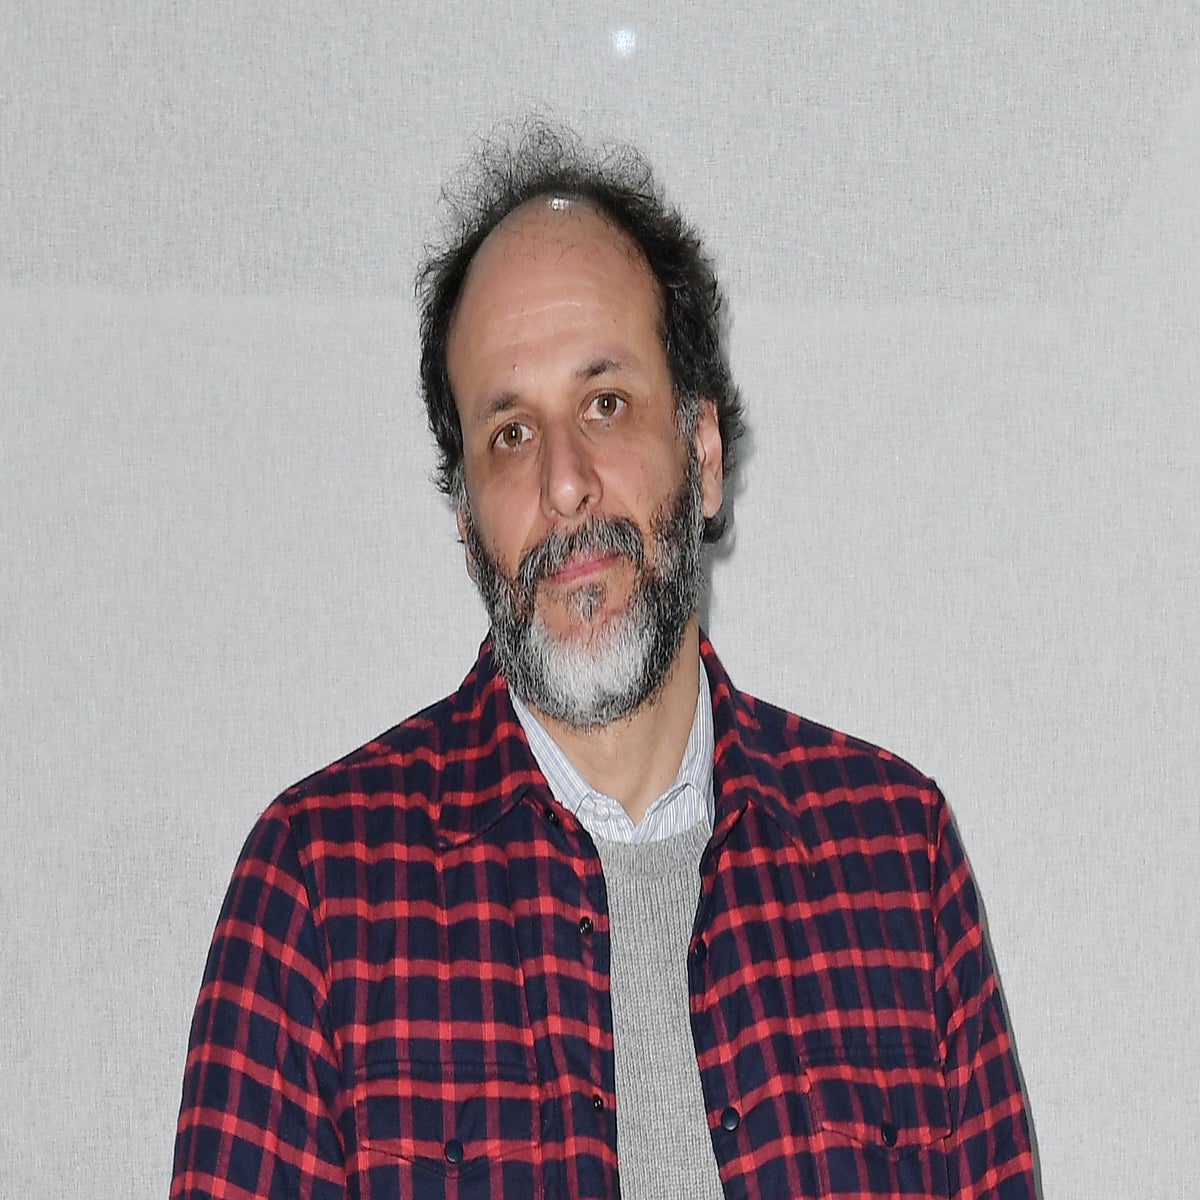 Luca Guadagnino on His Latest Project, Salvatore: Shoemaker of Dreams